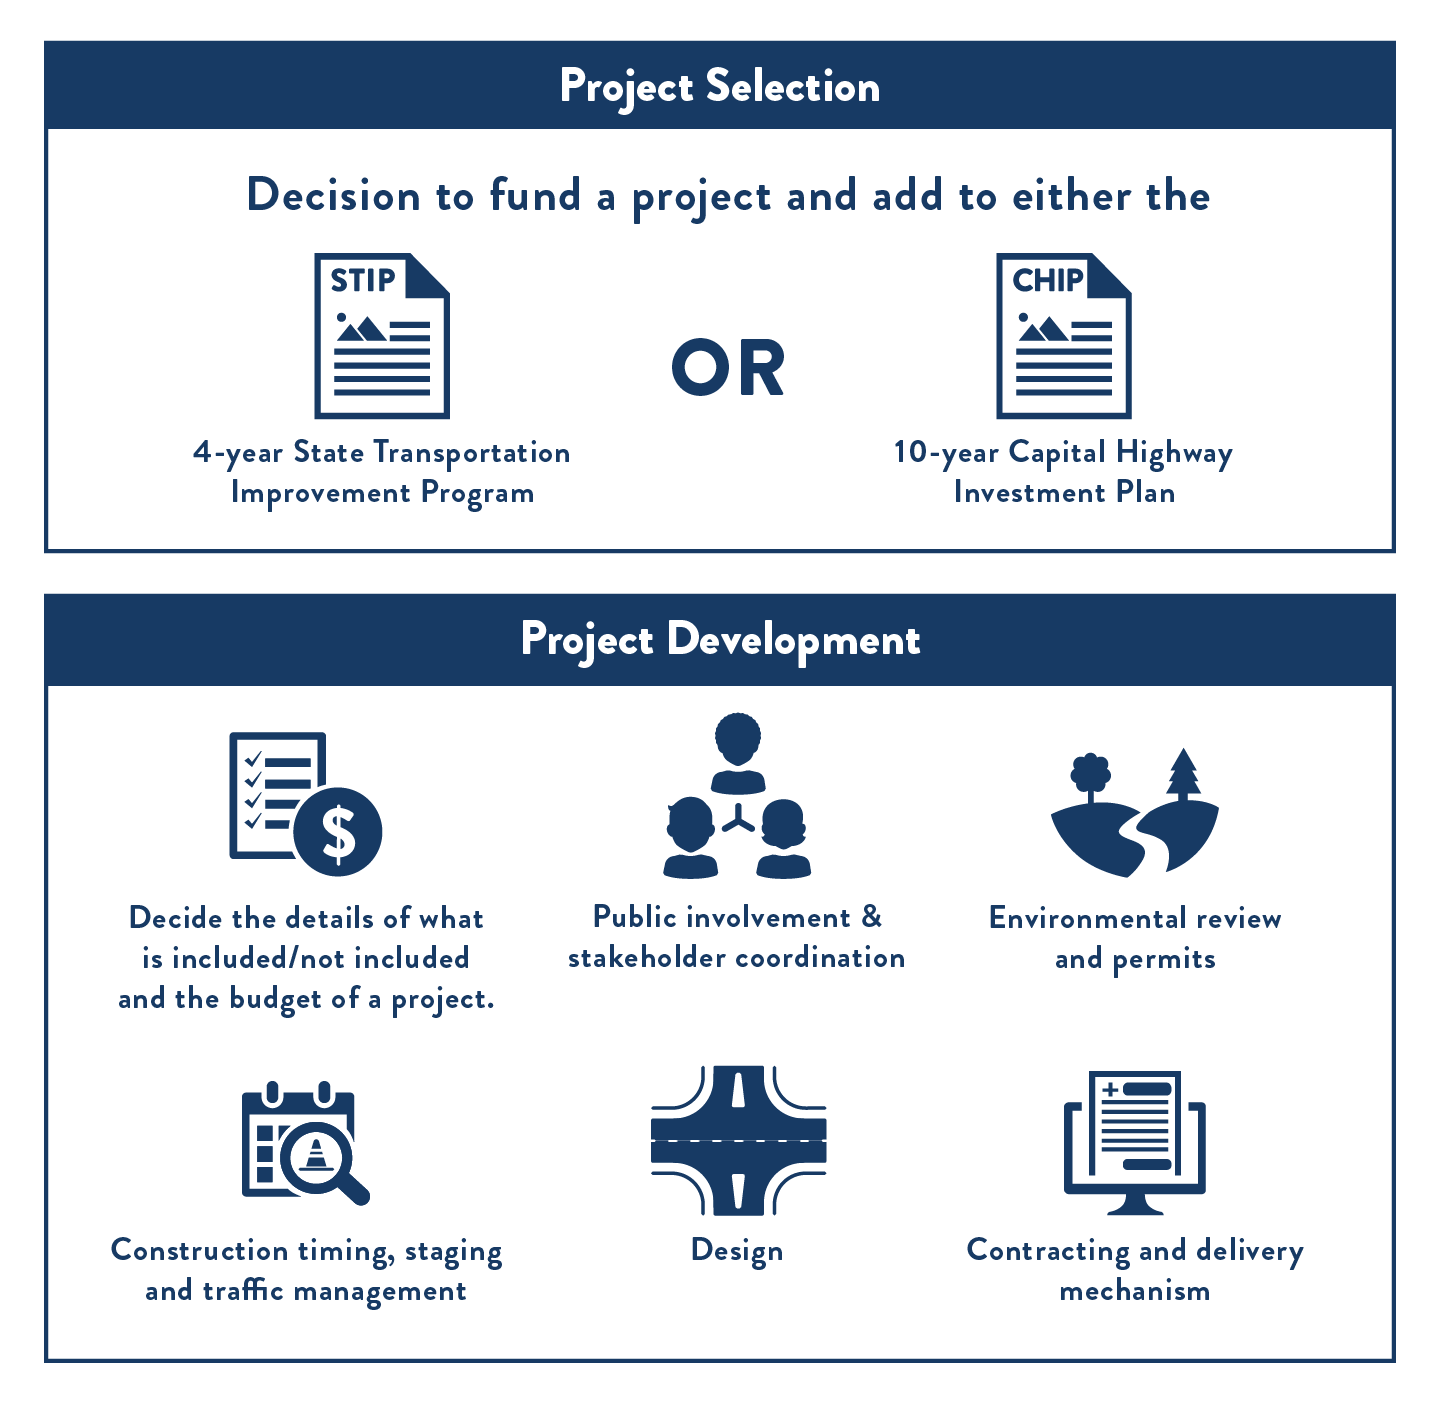 Title: Comparing Project Selection and Development - Description: This chart compares project selection and project development. Project selection is the decision to fund a project and add to the list of planned and programmed projects in either the 4 year State Transportation Improvement Program or the 10 year Capital Highway Investment Plan. Project development includes: process of deciding the details of what is included/not included and the budget of a project, public involvement and stakeholder coordination, environmental review and permits, design, construction timing, staging and traffic management, and contracting and delivery mechanism.